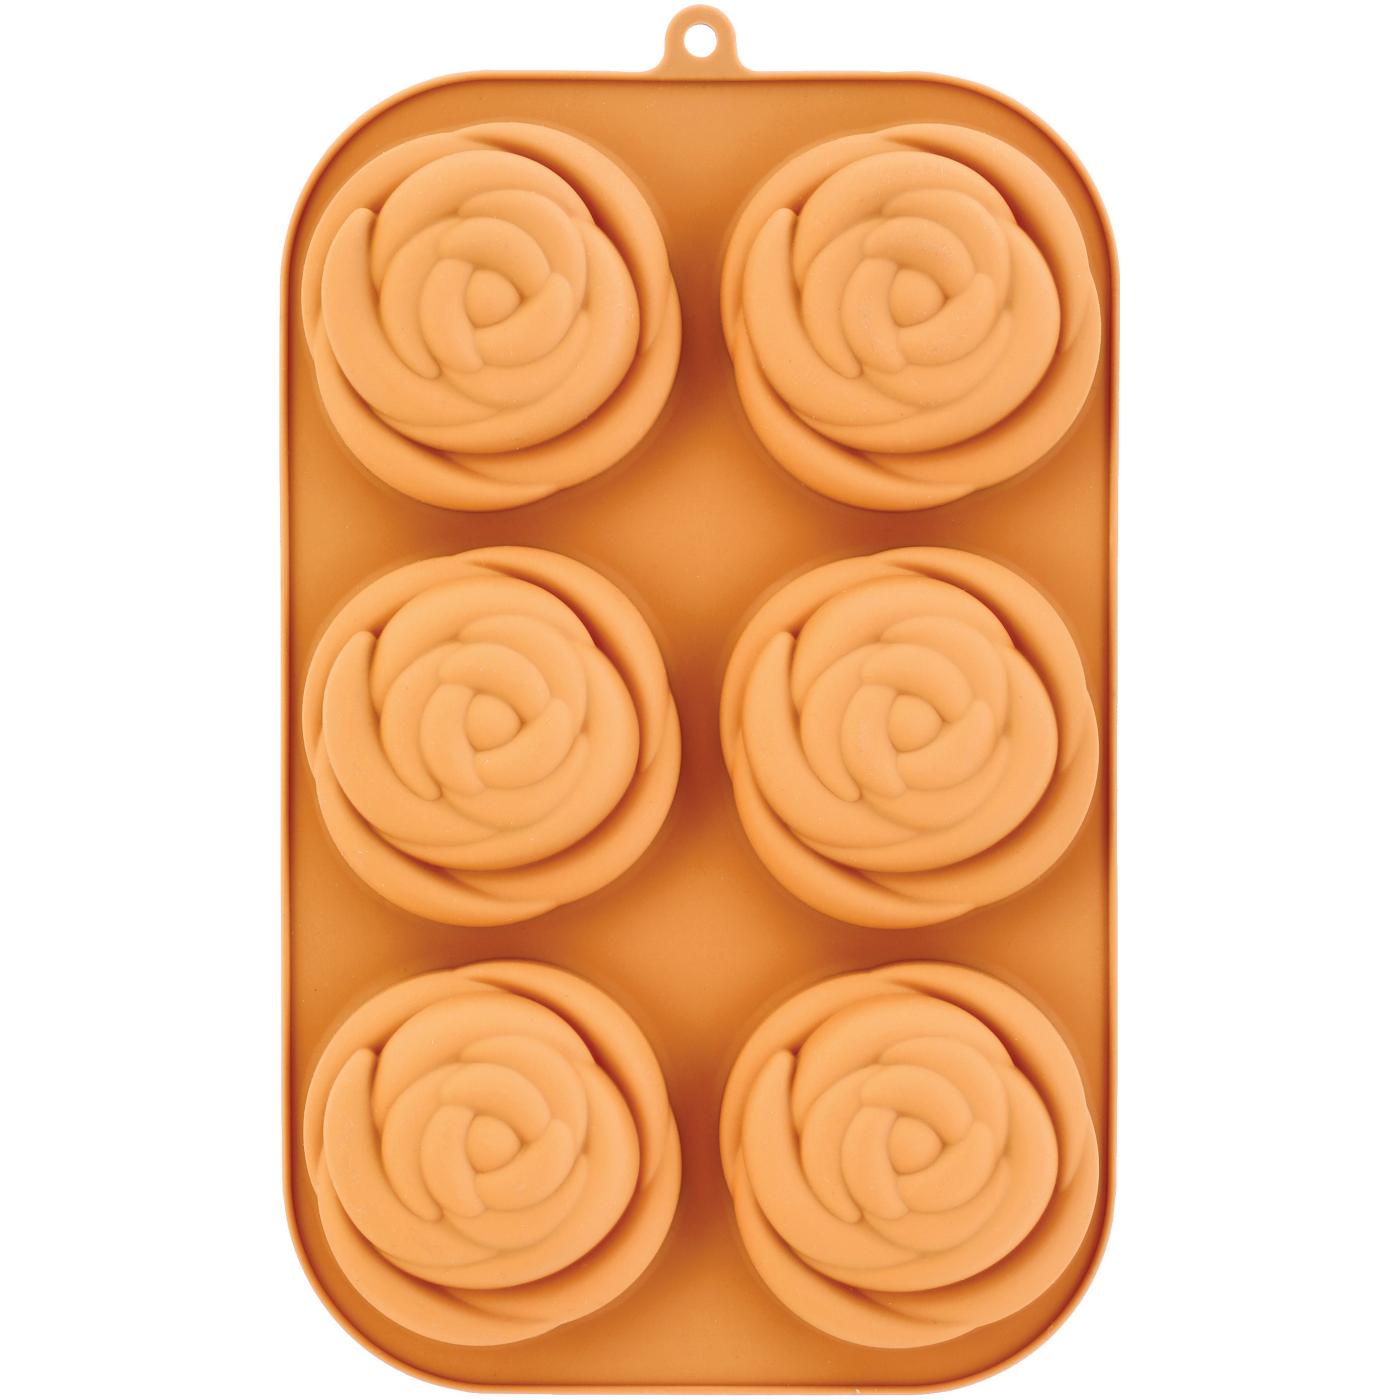 Kitchen & Table by H-E-B 6 Cavity Silicone Treat Mold - Rose; image 1 of 2